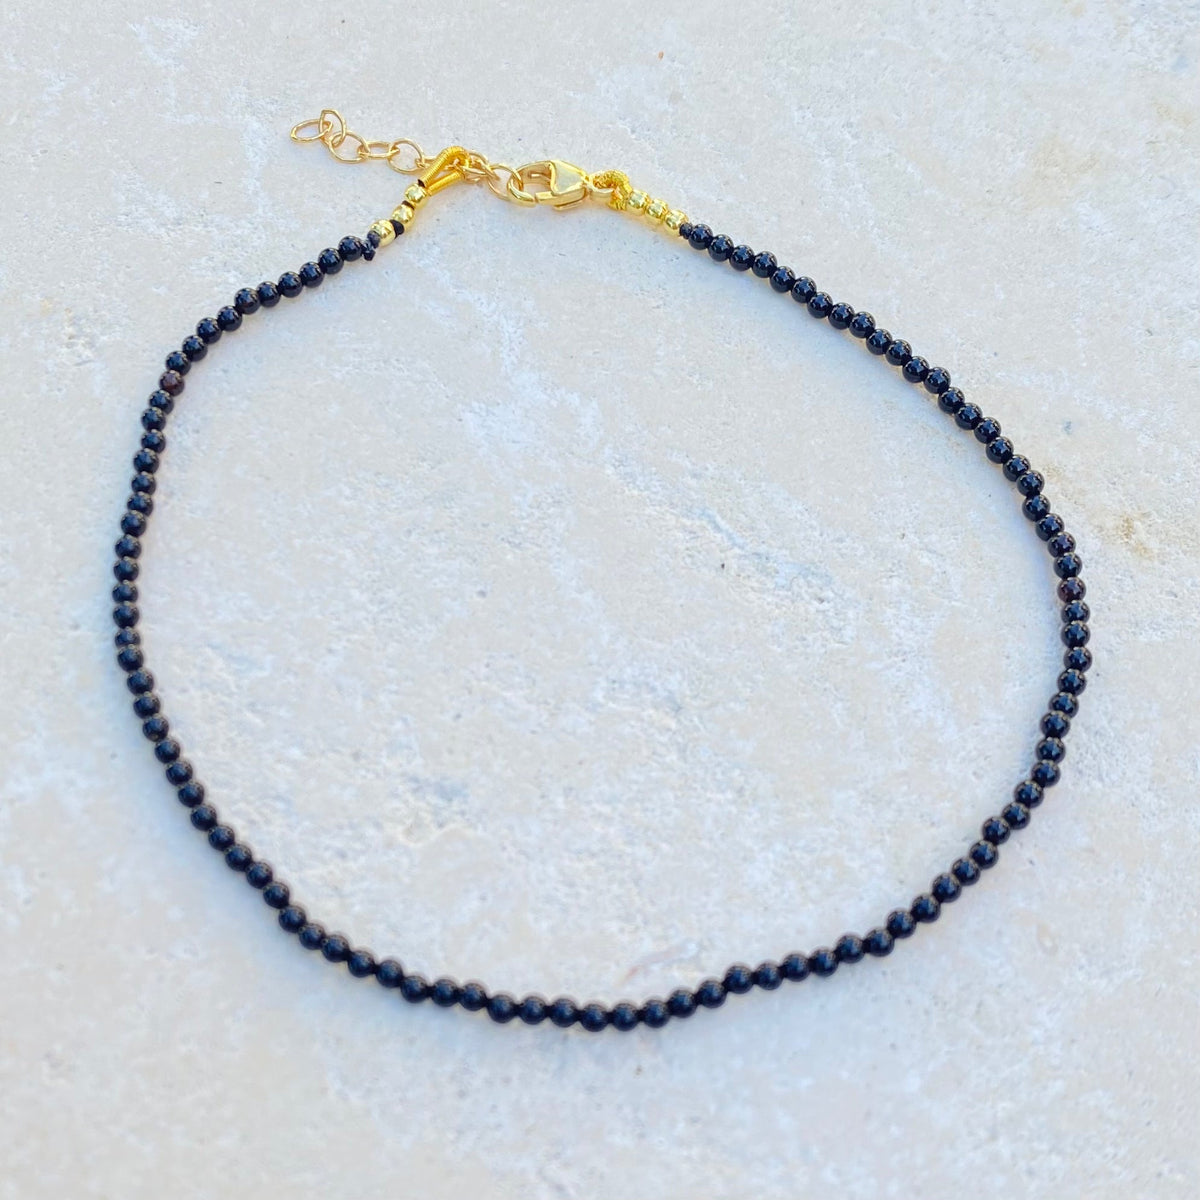 Beaded Gemstone and Pearl Anklet